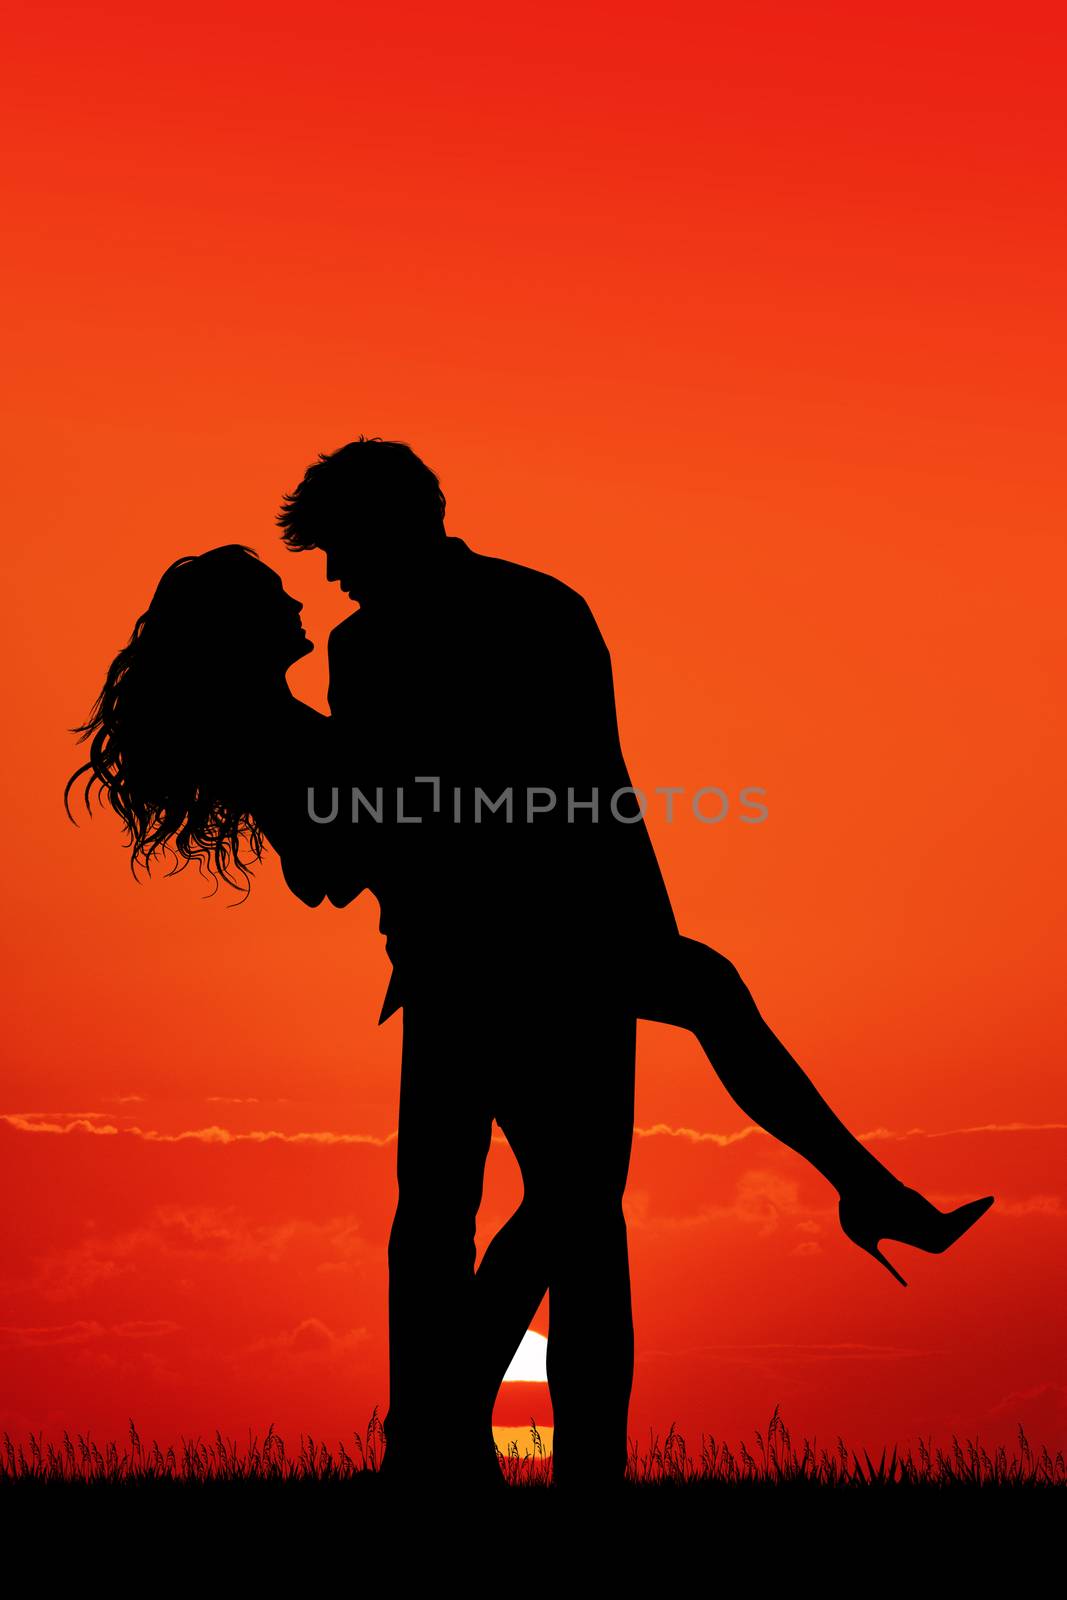 illustration of romantic couple silhouette at sunset